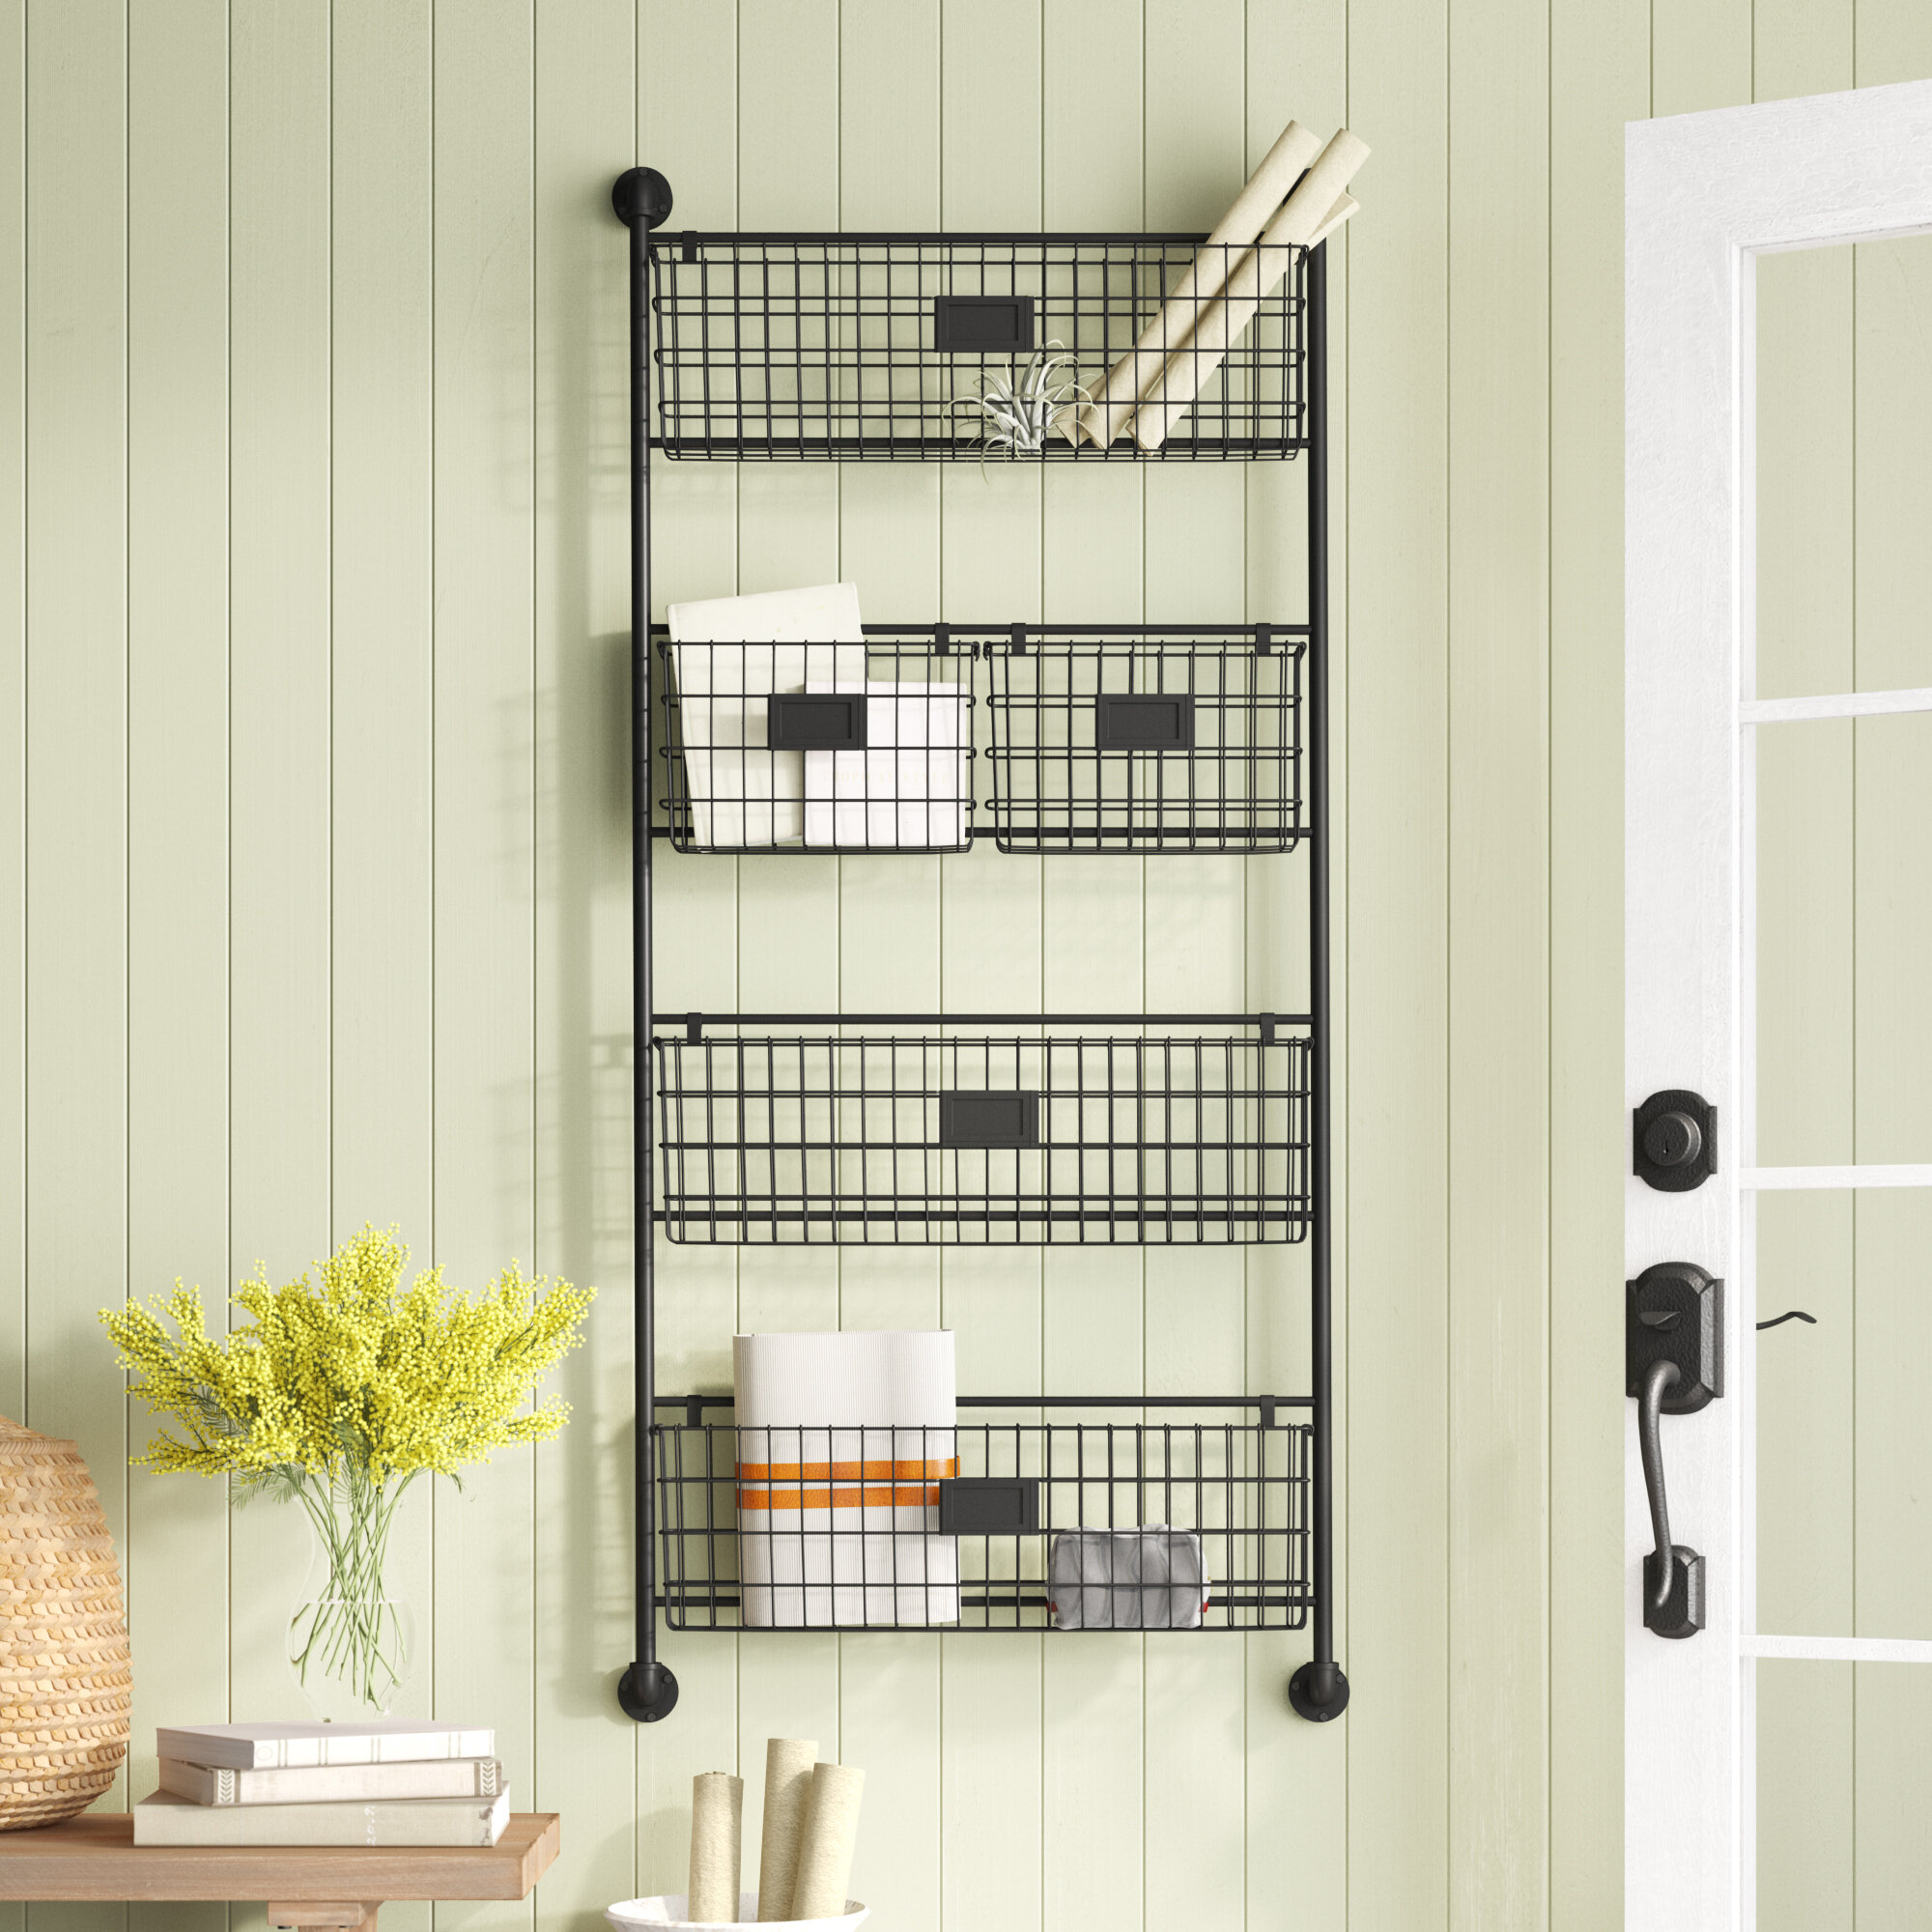 Wall Shelves With Baskets - Foter